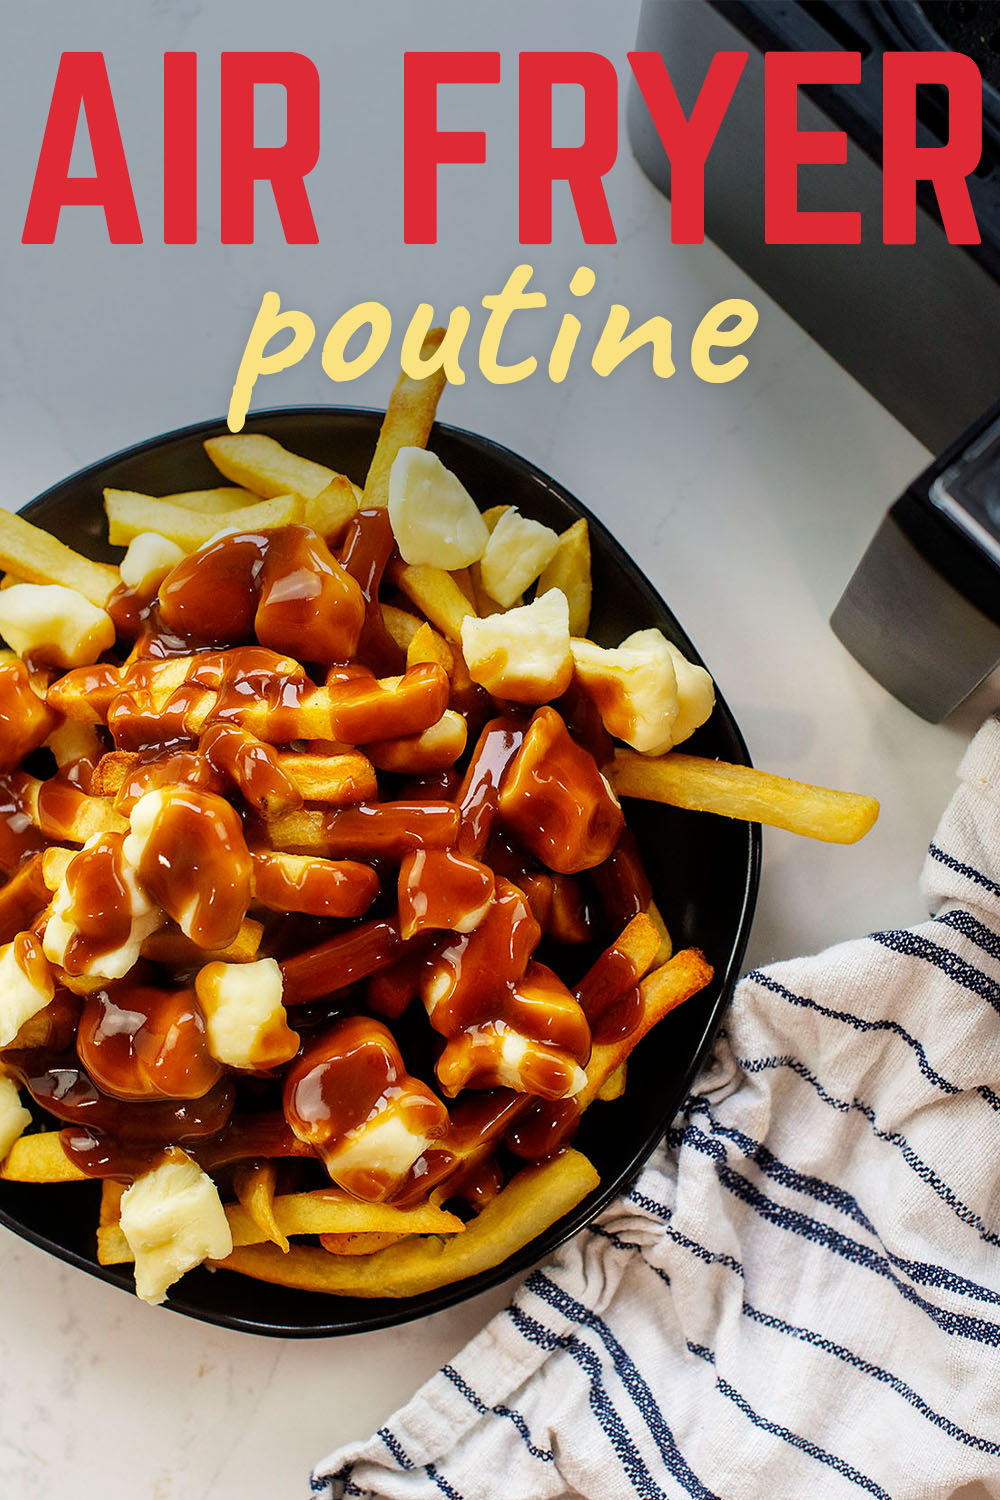 This simple poutine recipe uses the air fryer to make this delicious meal as easy as possible.